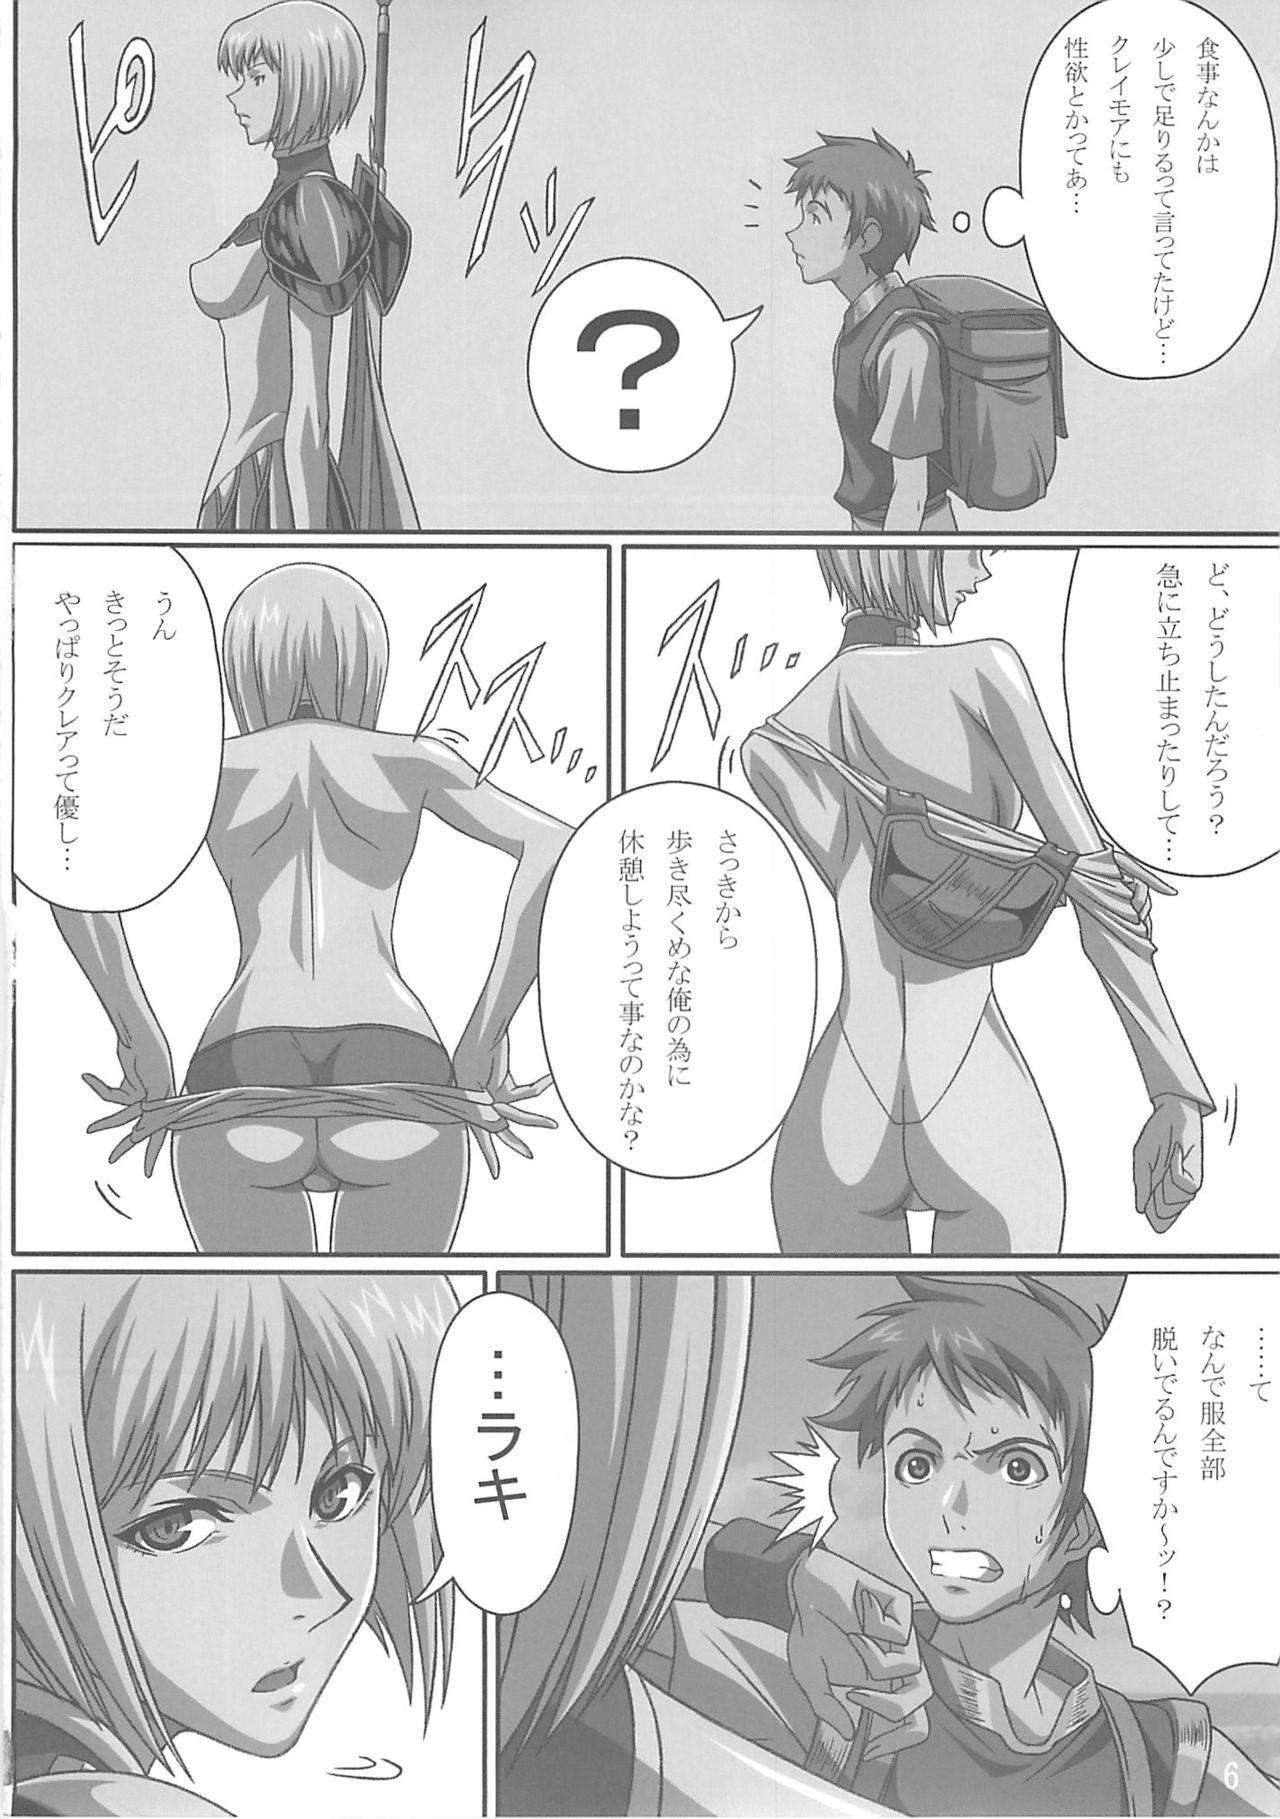 Cosplay INDUSTRIAL - Claymore High - Page 5